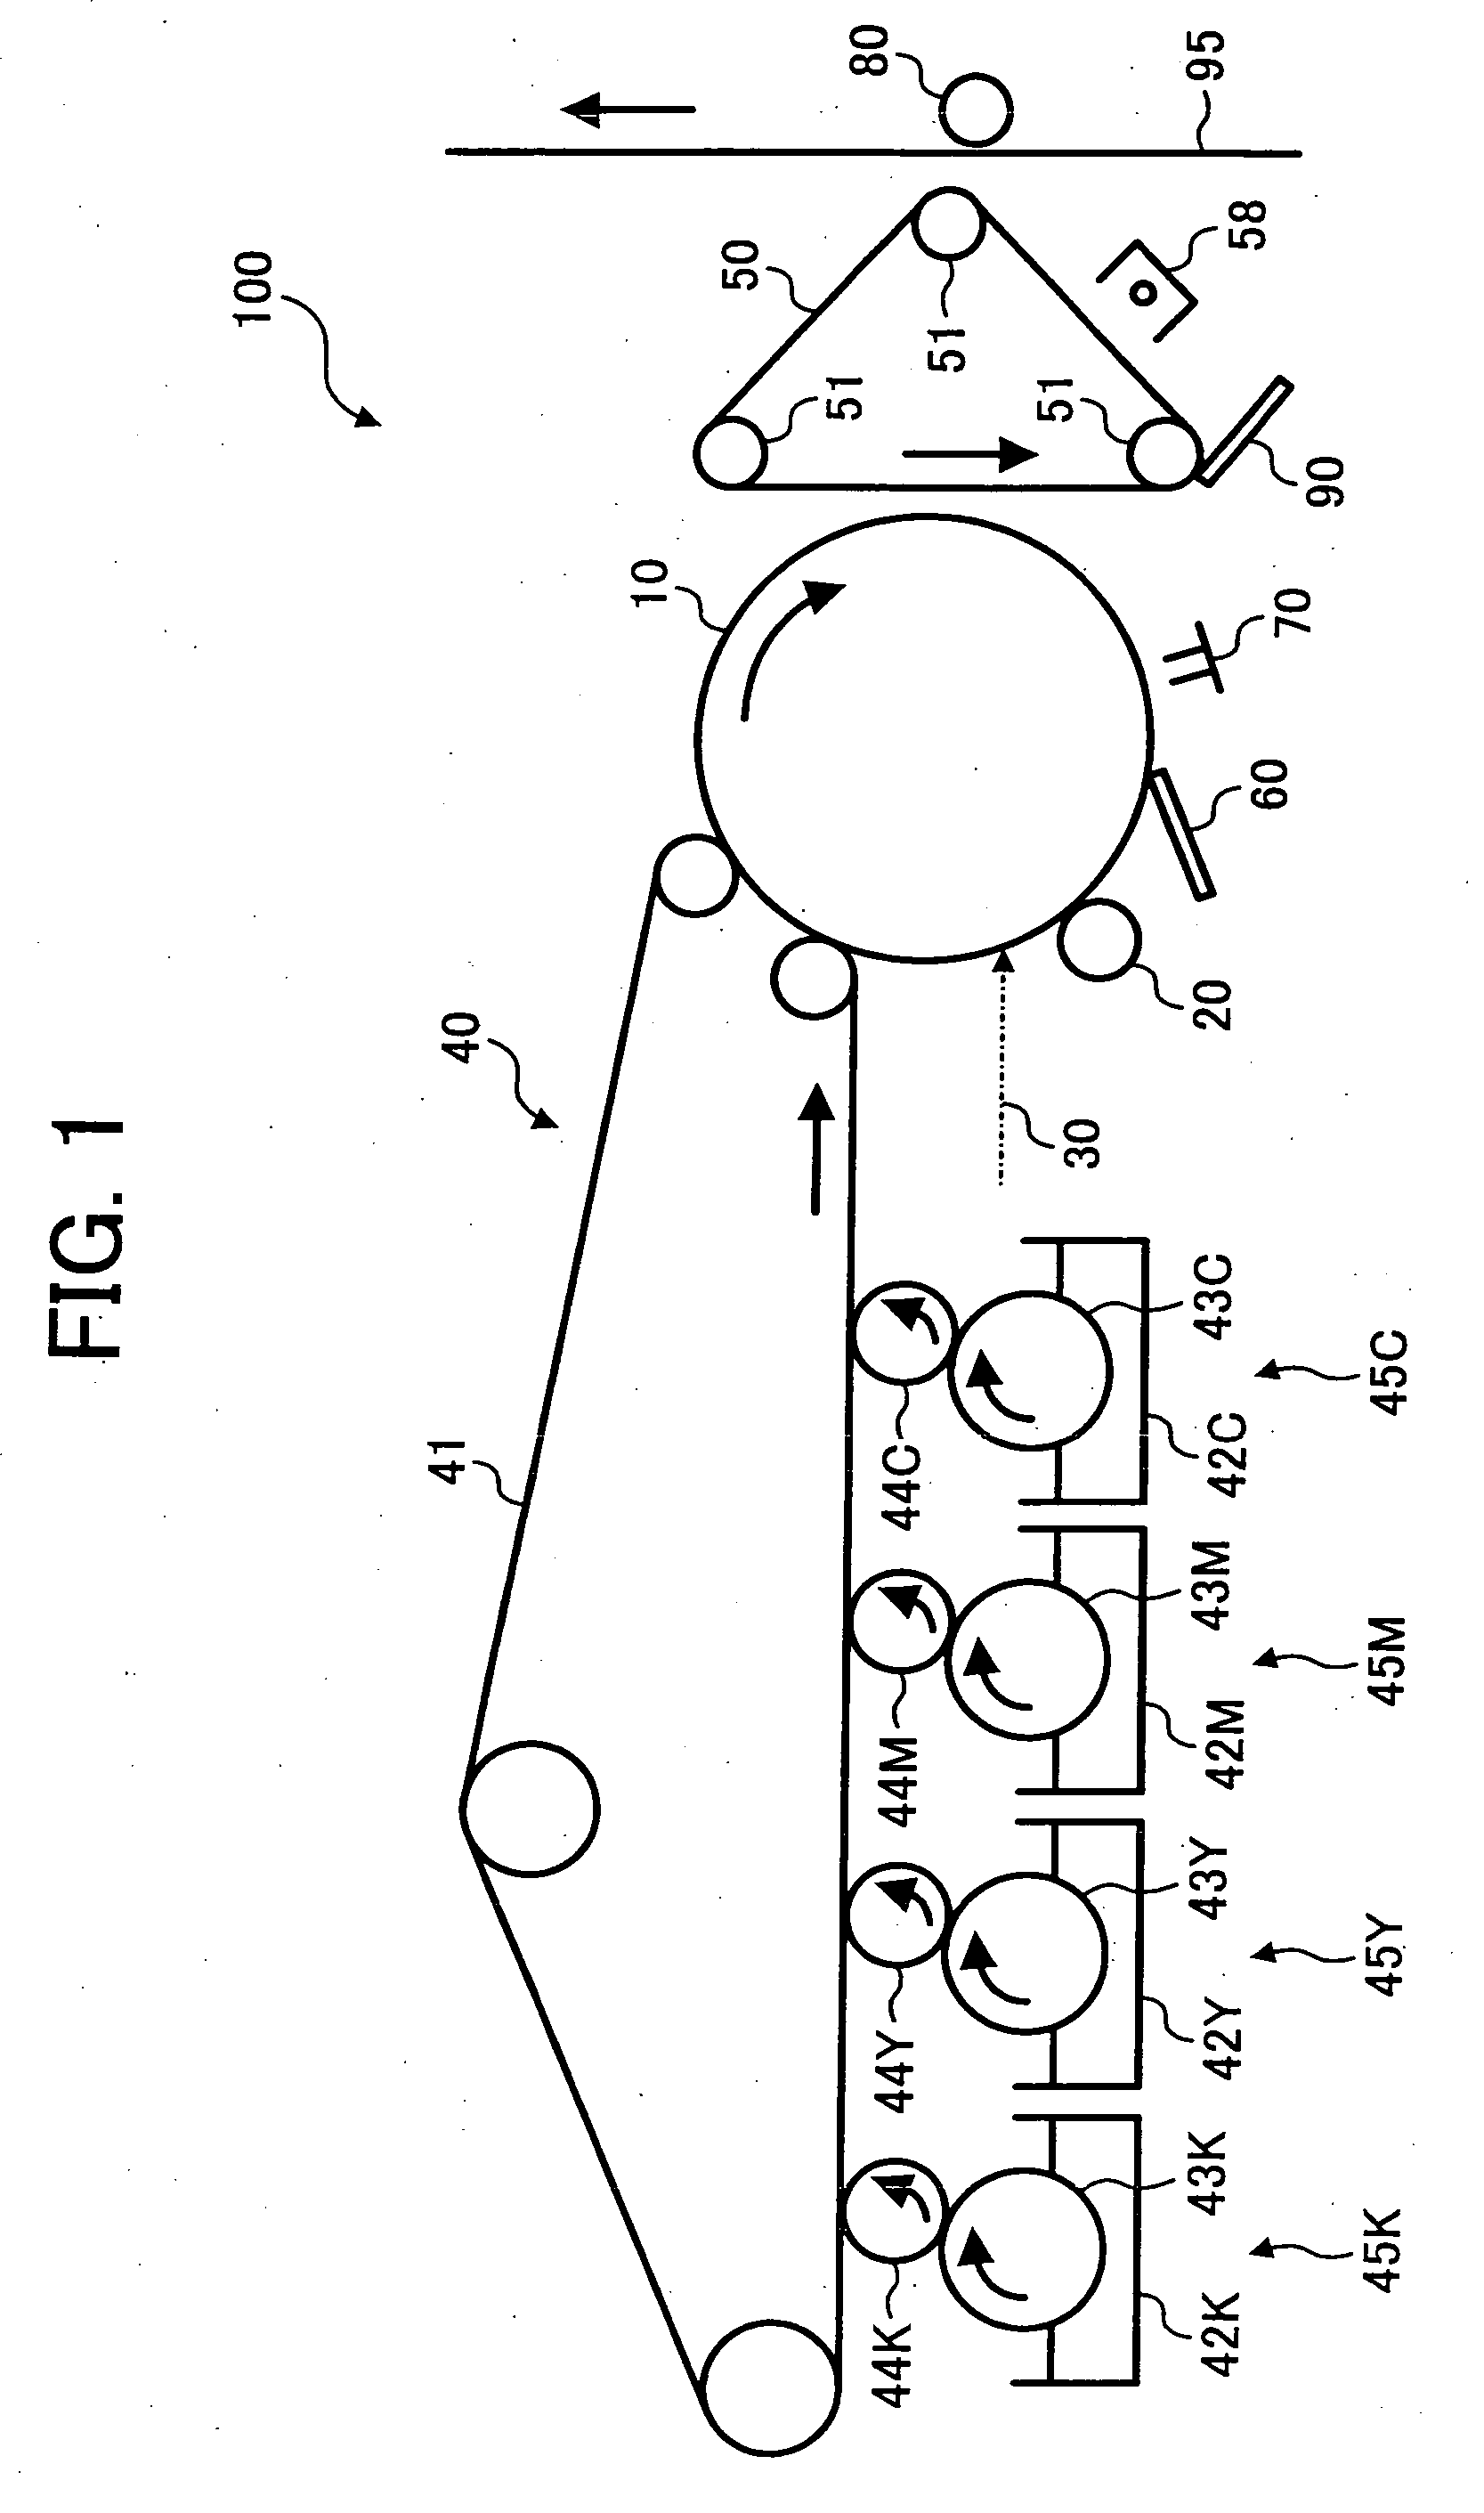 Toner and image forming method using the same